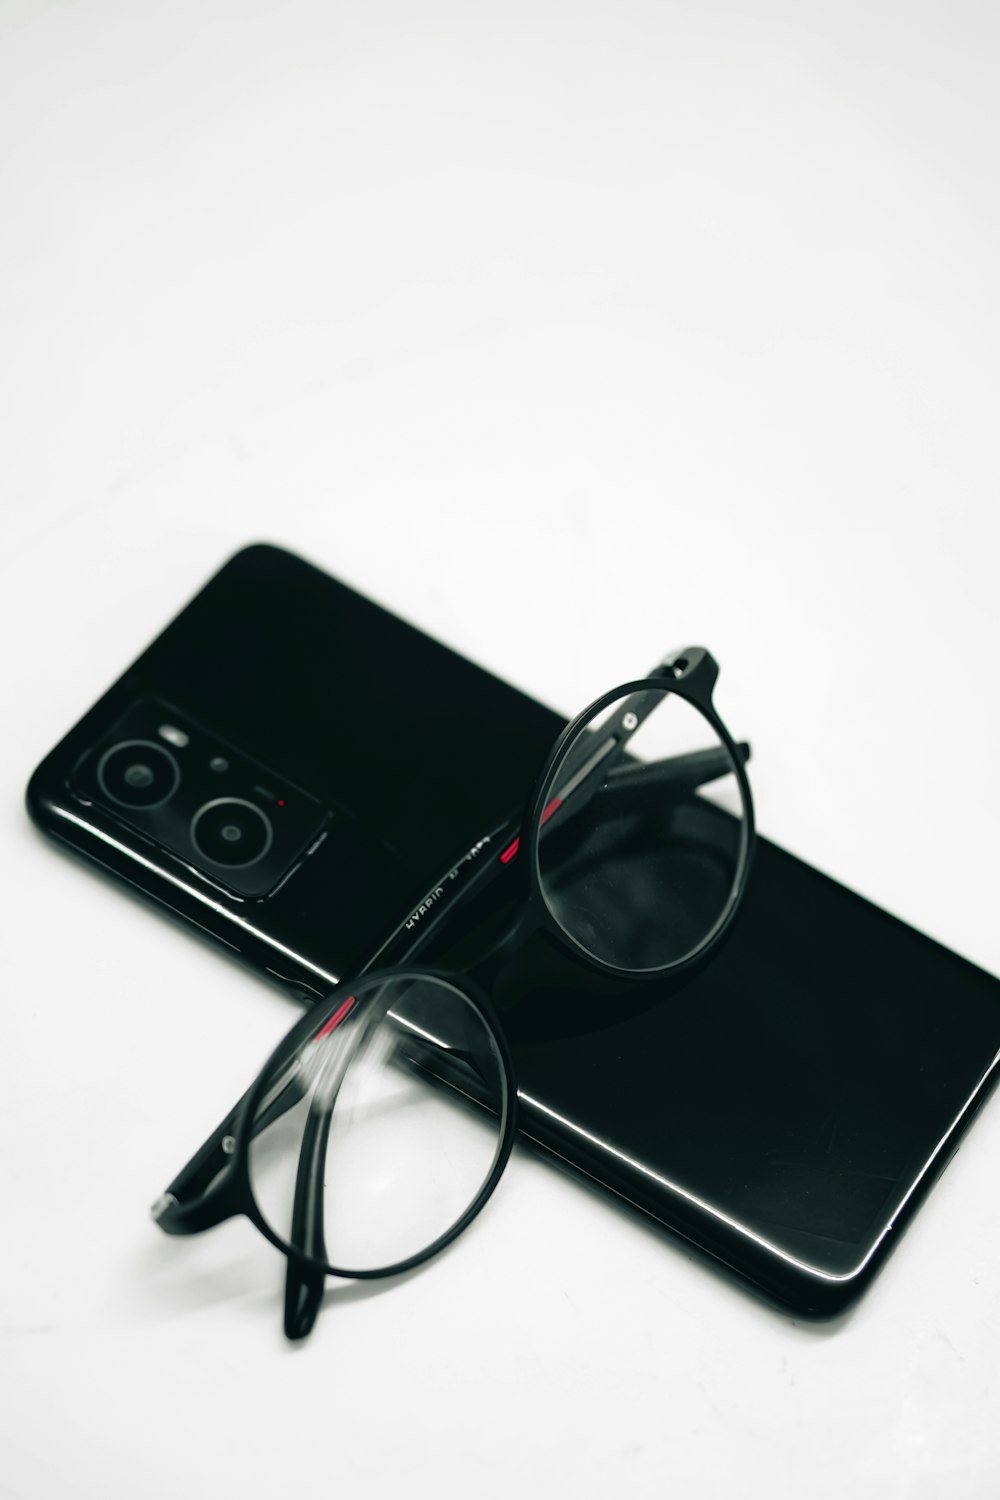 a pair of glasses sitting on top of a phone